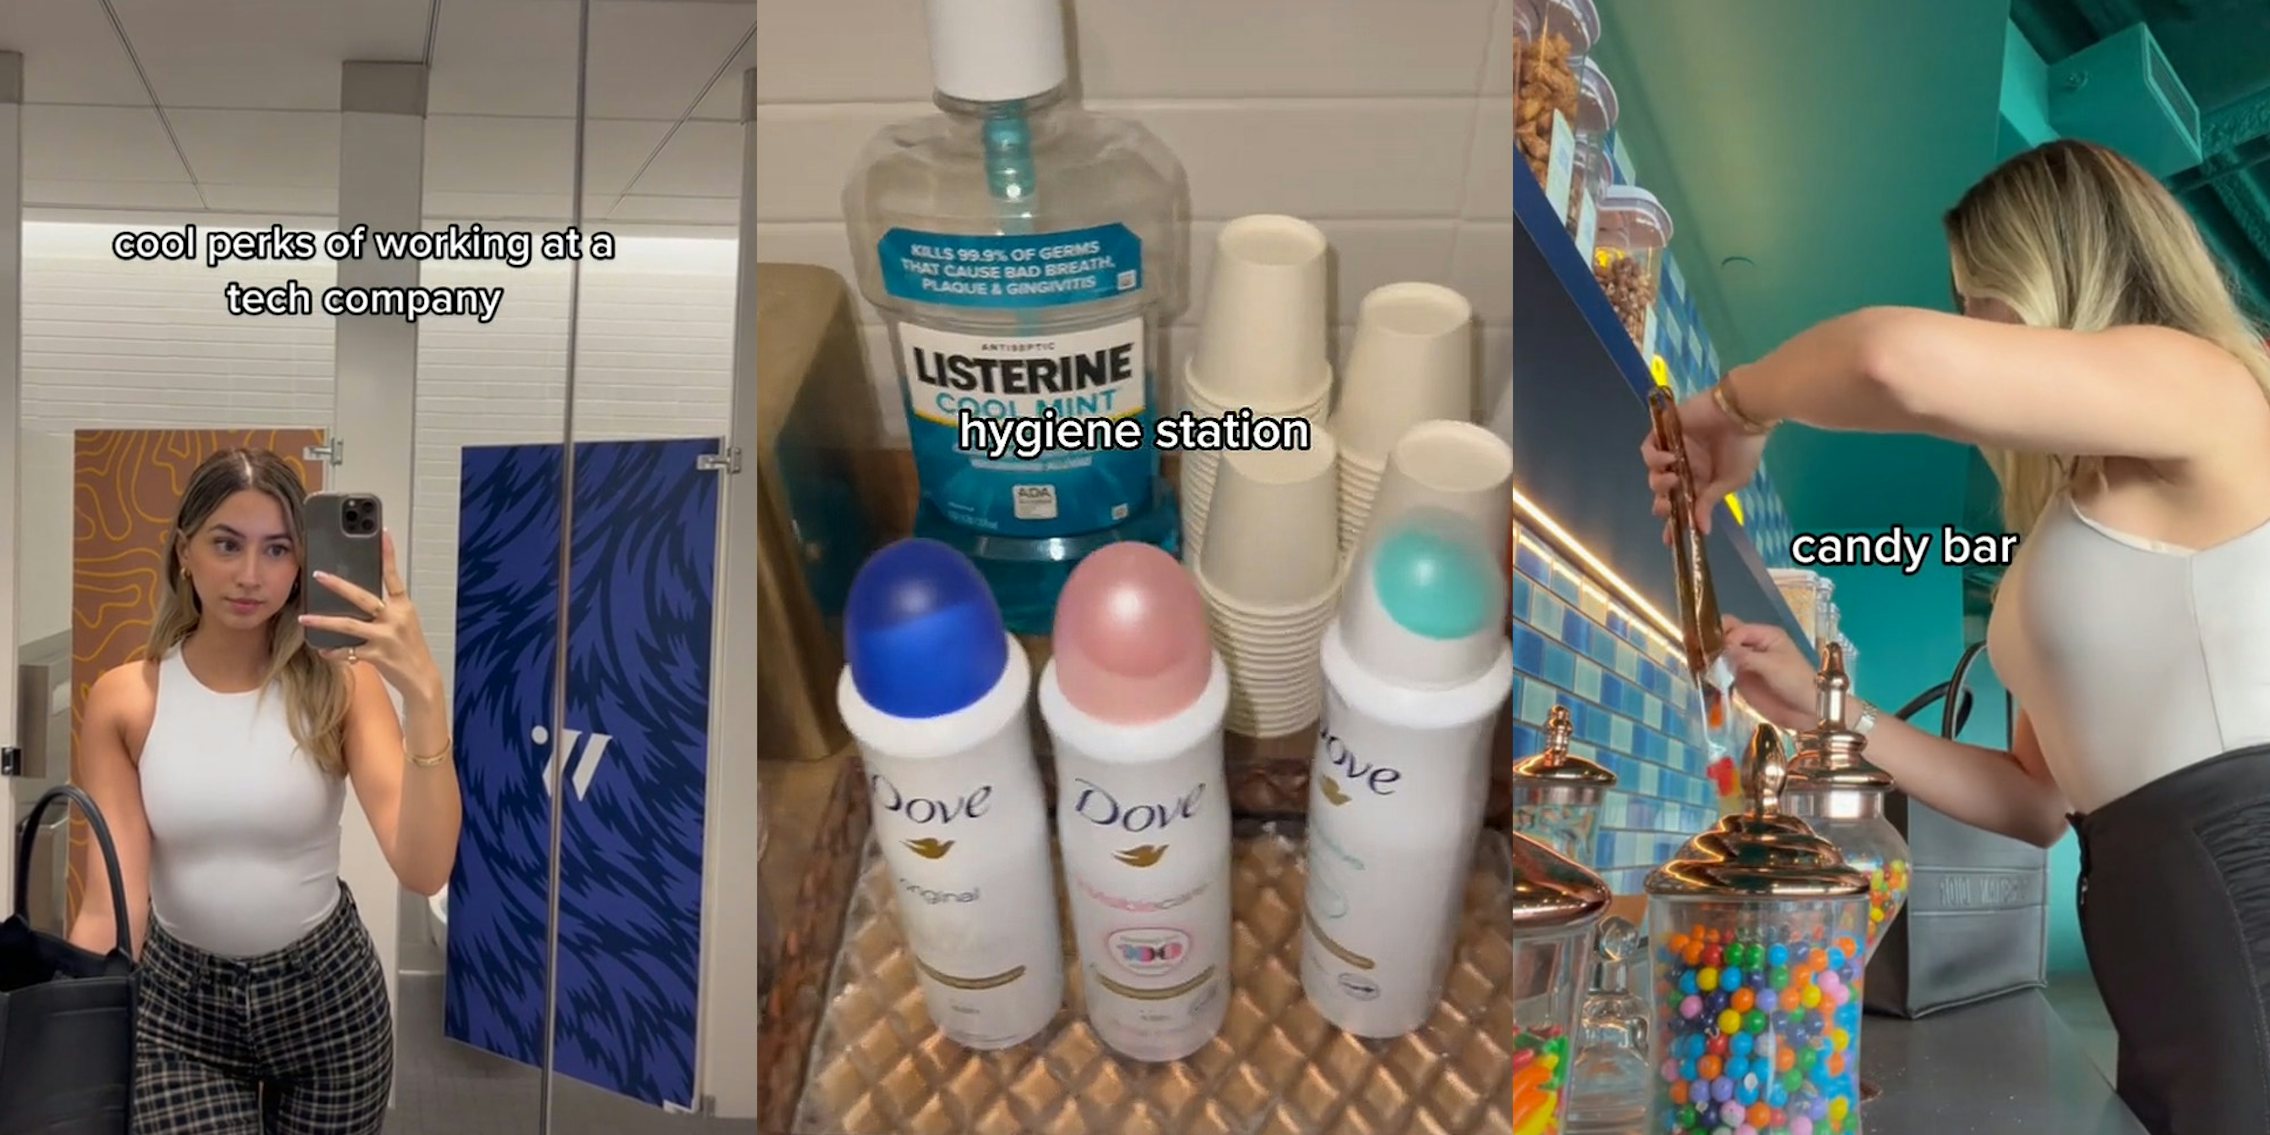 woman posing in bathroom for mirror selfie caption 'cool perks of working at a tech company' (l) hygienic products (mouthwash deodorant) in basket caption 'hygiene station' (c) woman using tongs to select candy from candy station caption 'candy bar' (r)